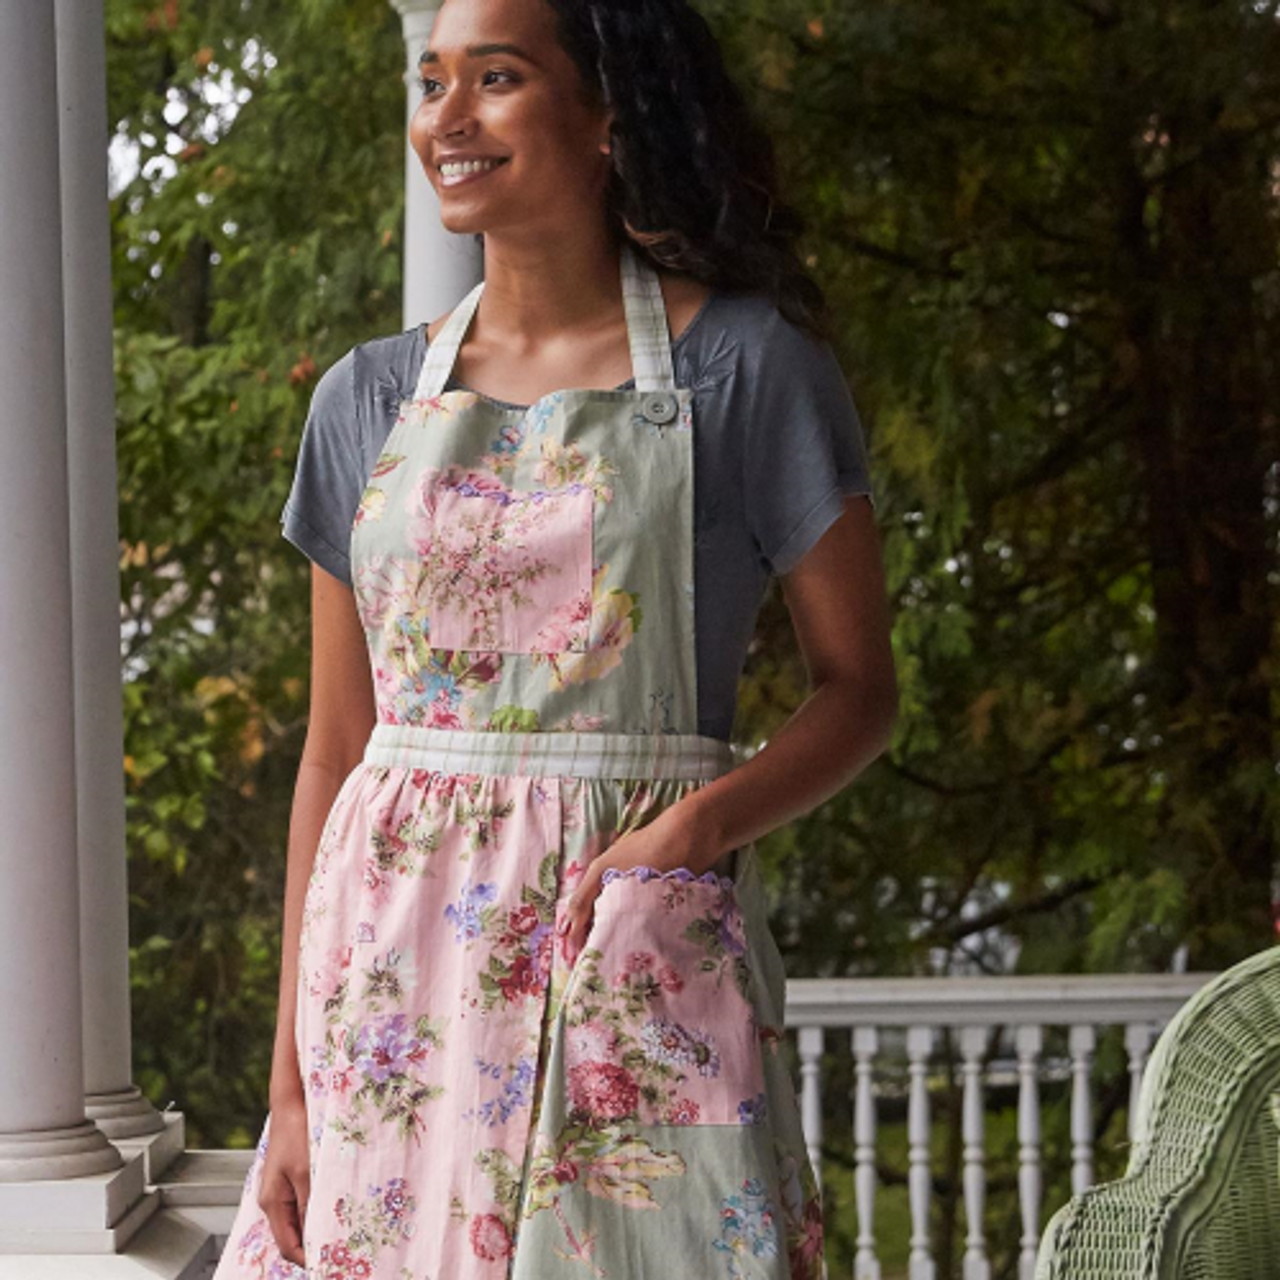 Lizzy Embroidery Apron  :Beautiful Designs by April Cornell